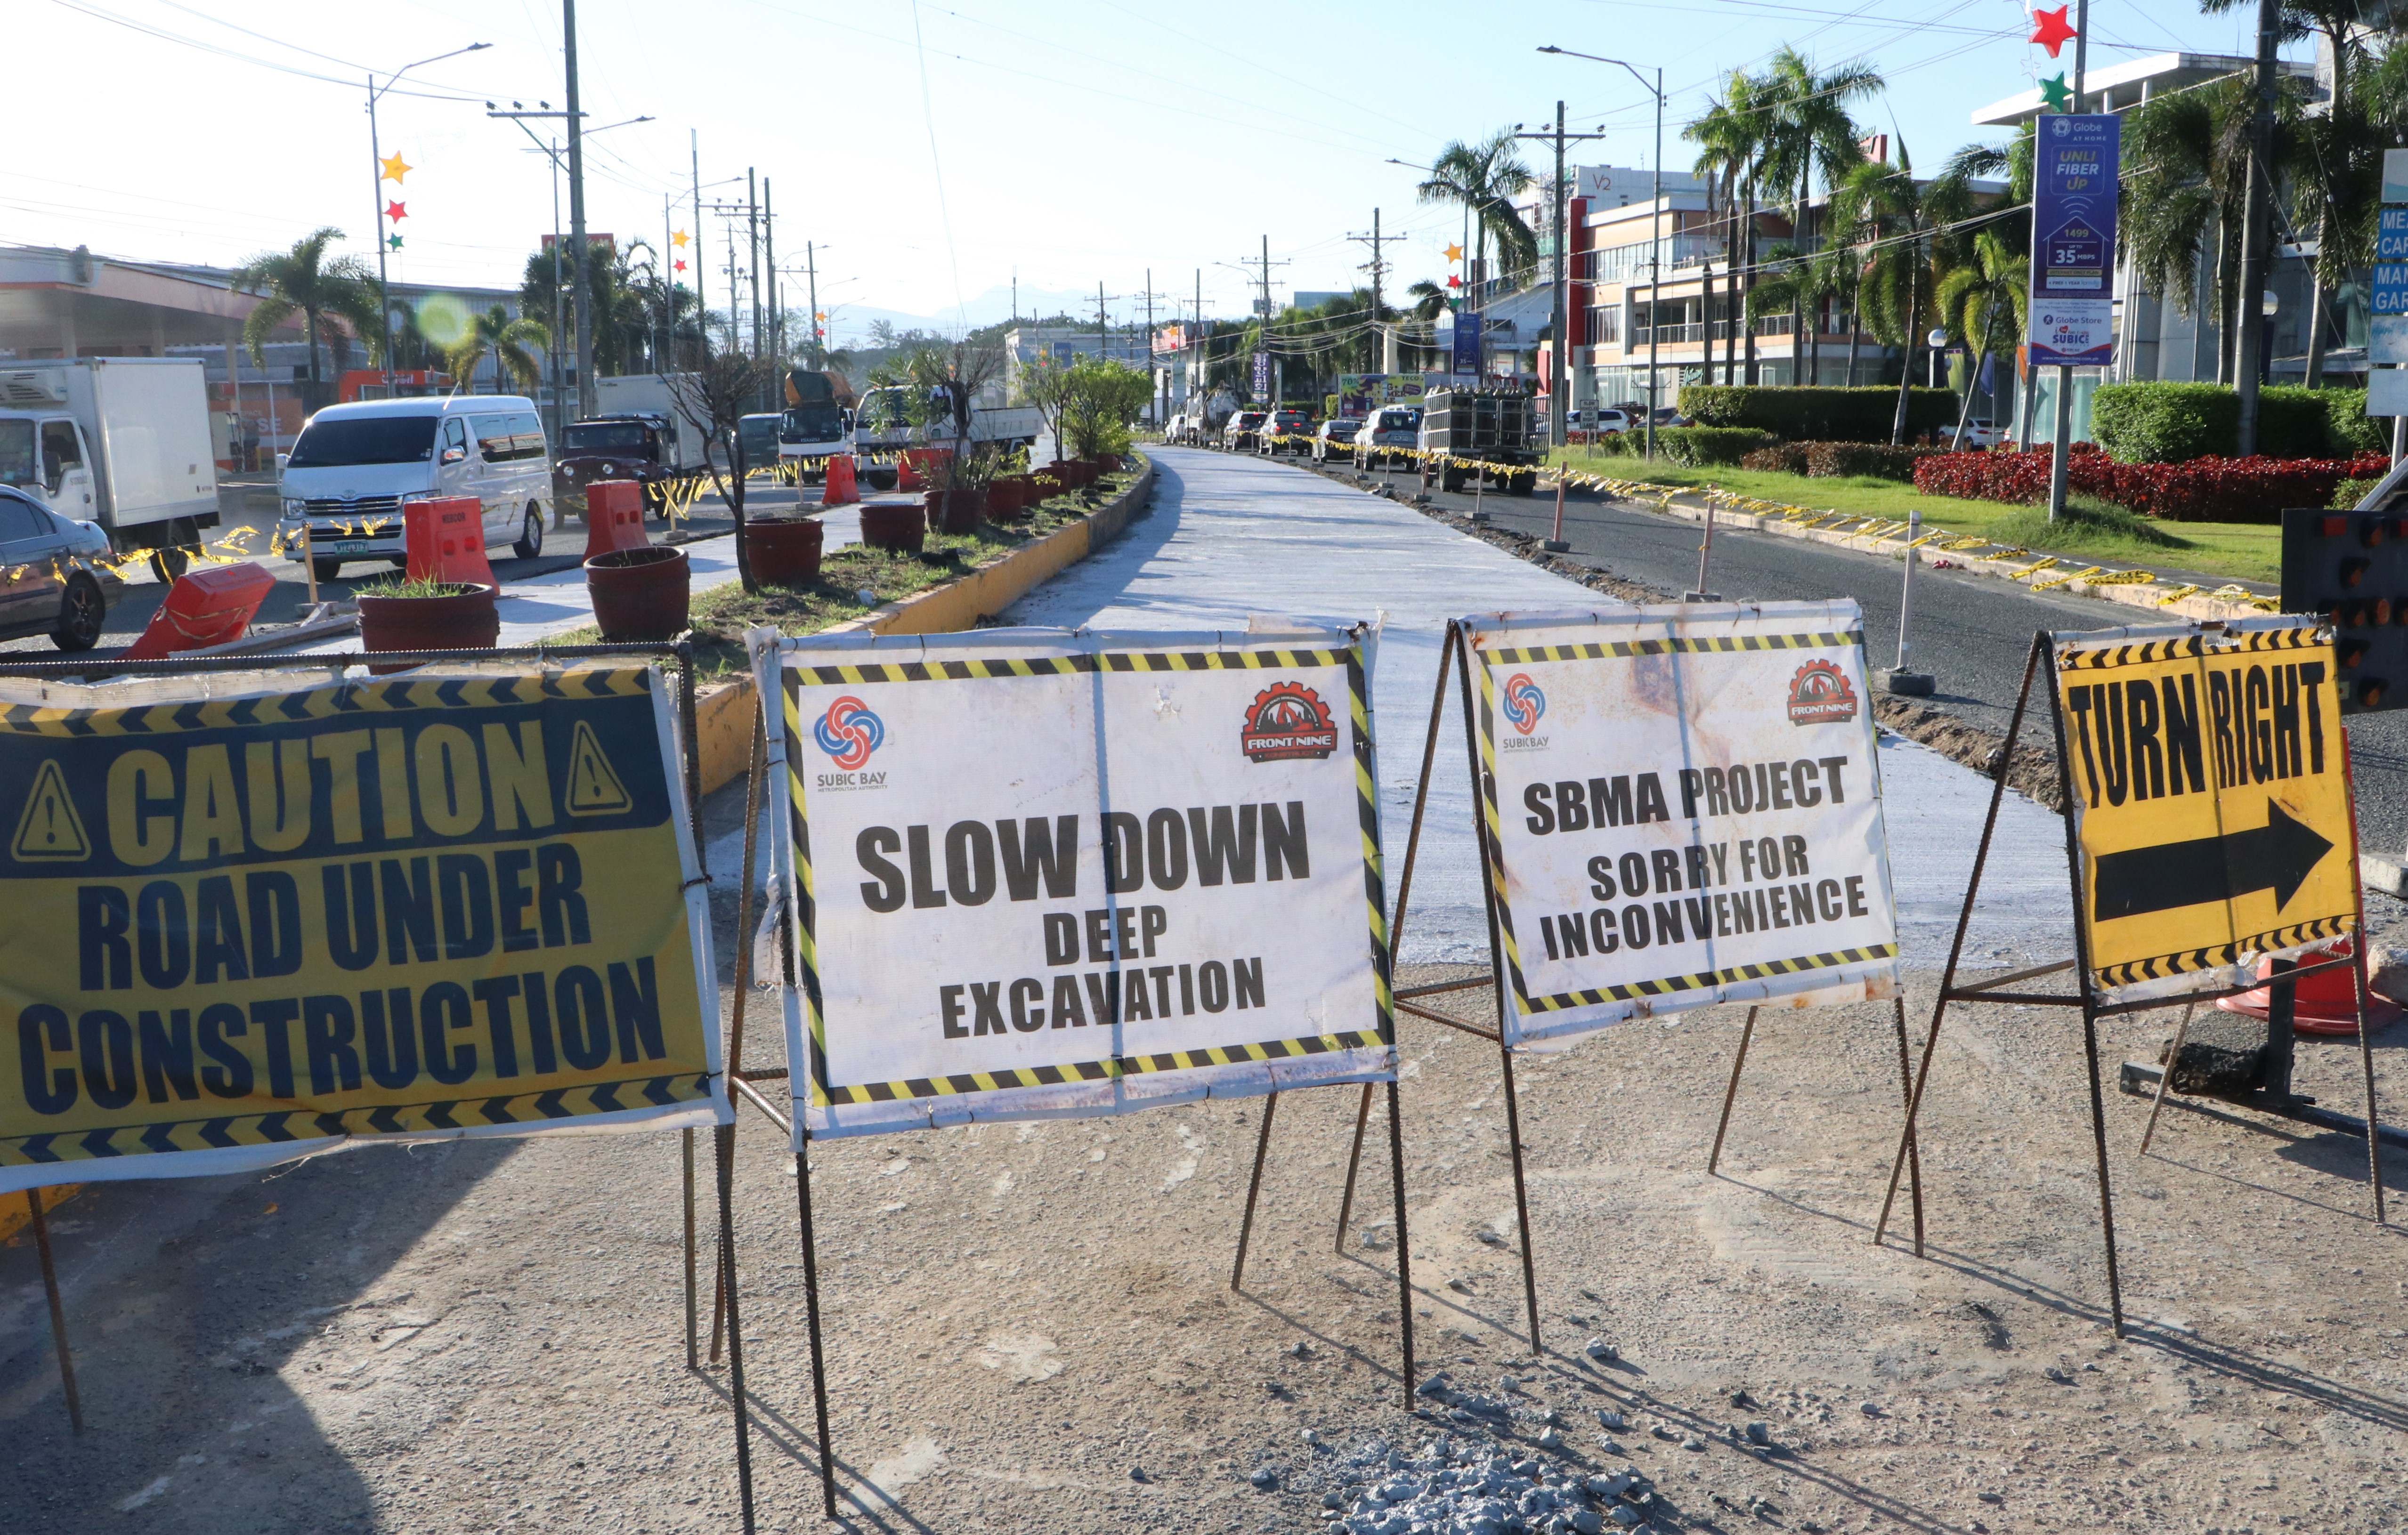 More road projects in the Subic Bay Freeport have been initiated under the SBMAâ€™s Build- Build-Build program and major components, such as this segment of the Rizal Highway, are expected to be completed by the yearend.